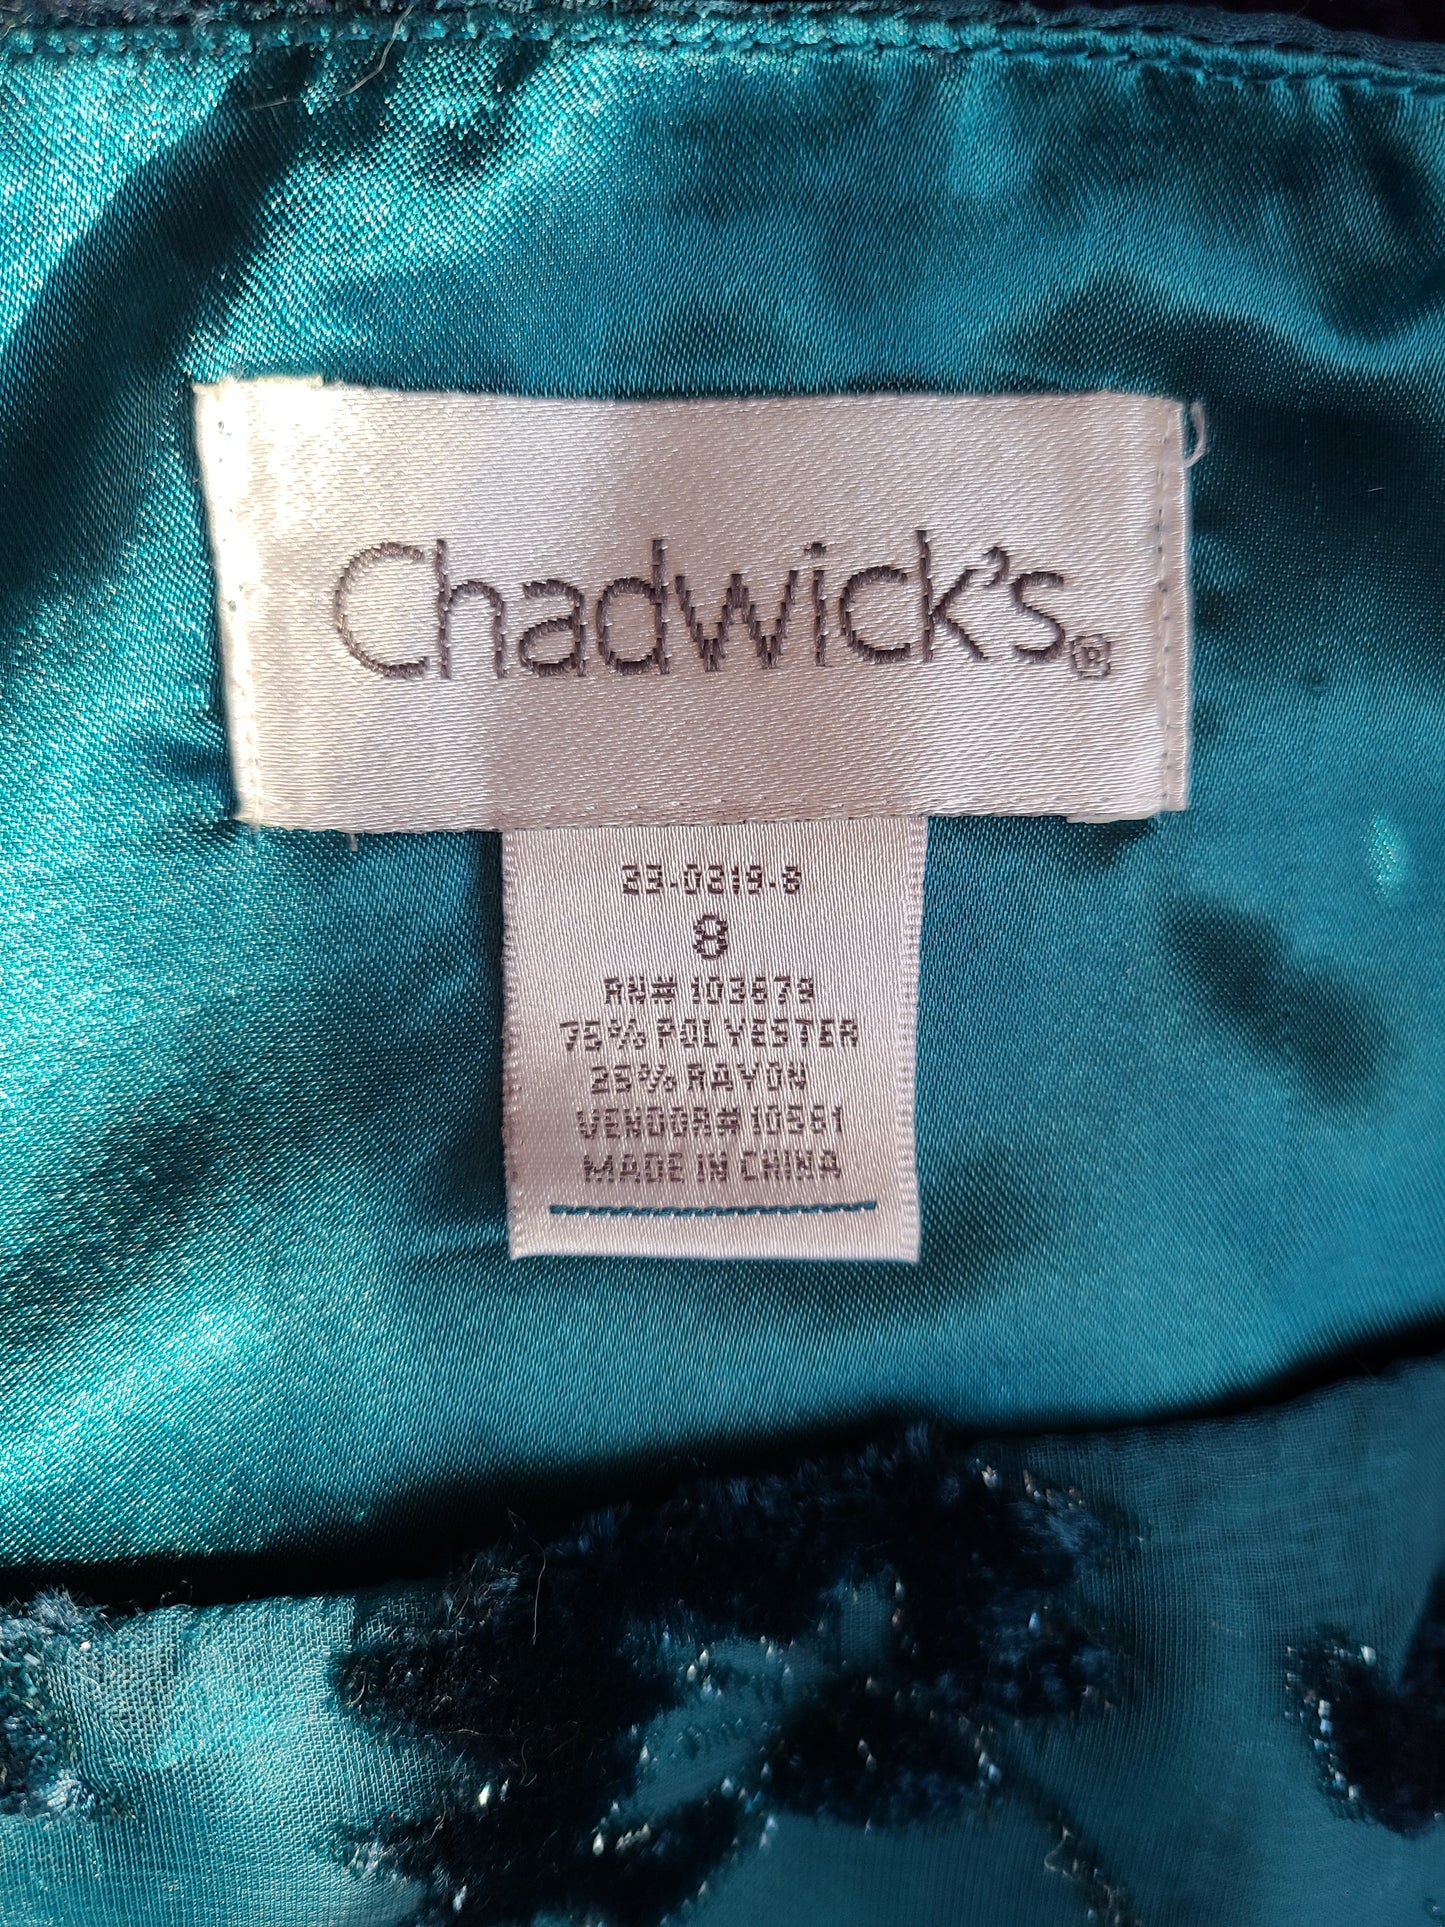 Vintage Chadwick's of Boston | Teal With Embellished Sheer Overlay Skirt | Size 8